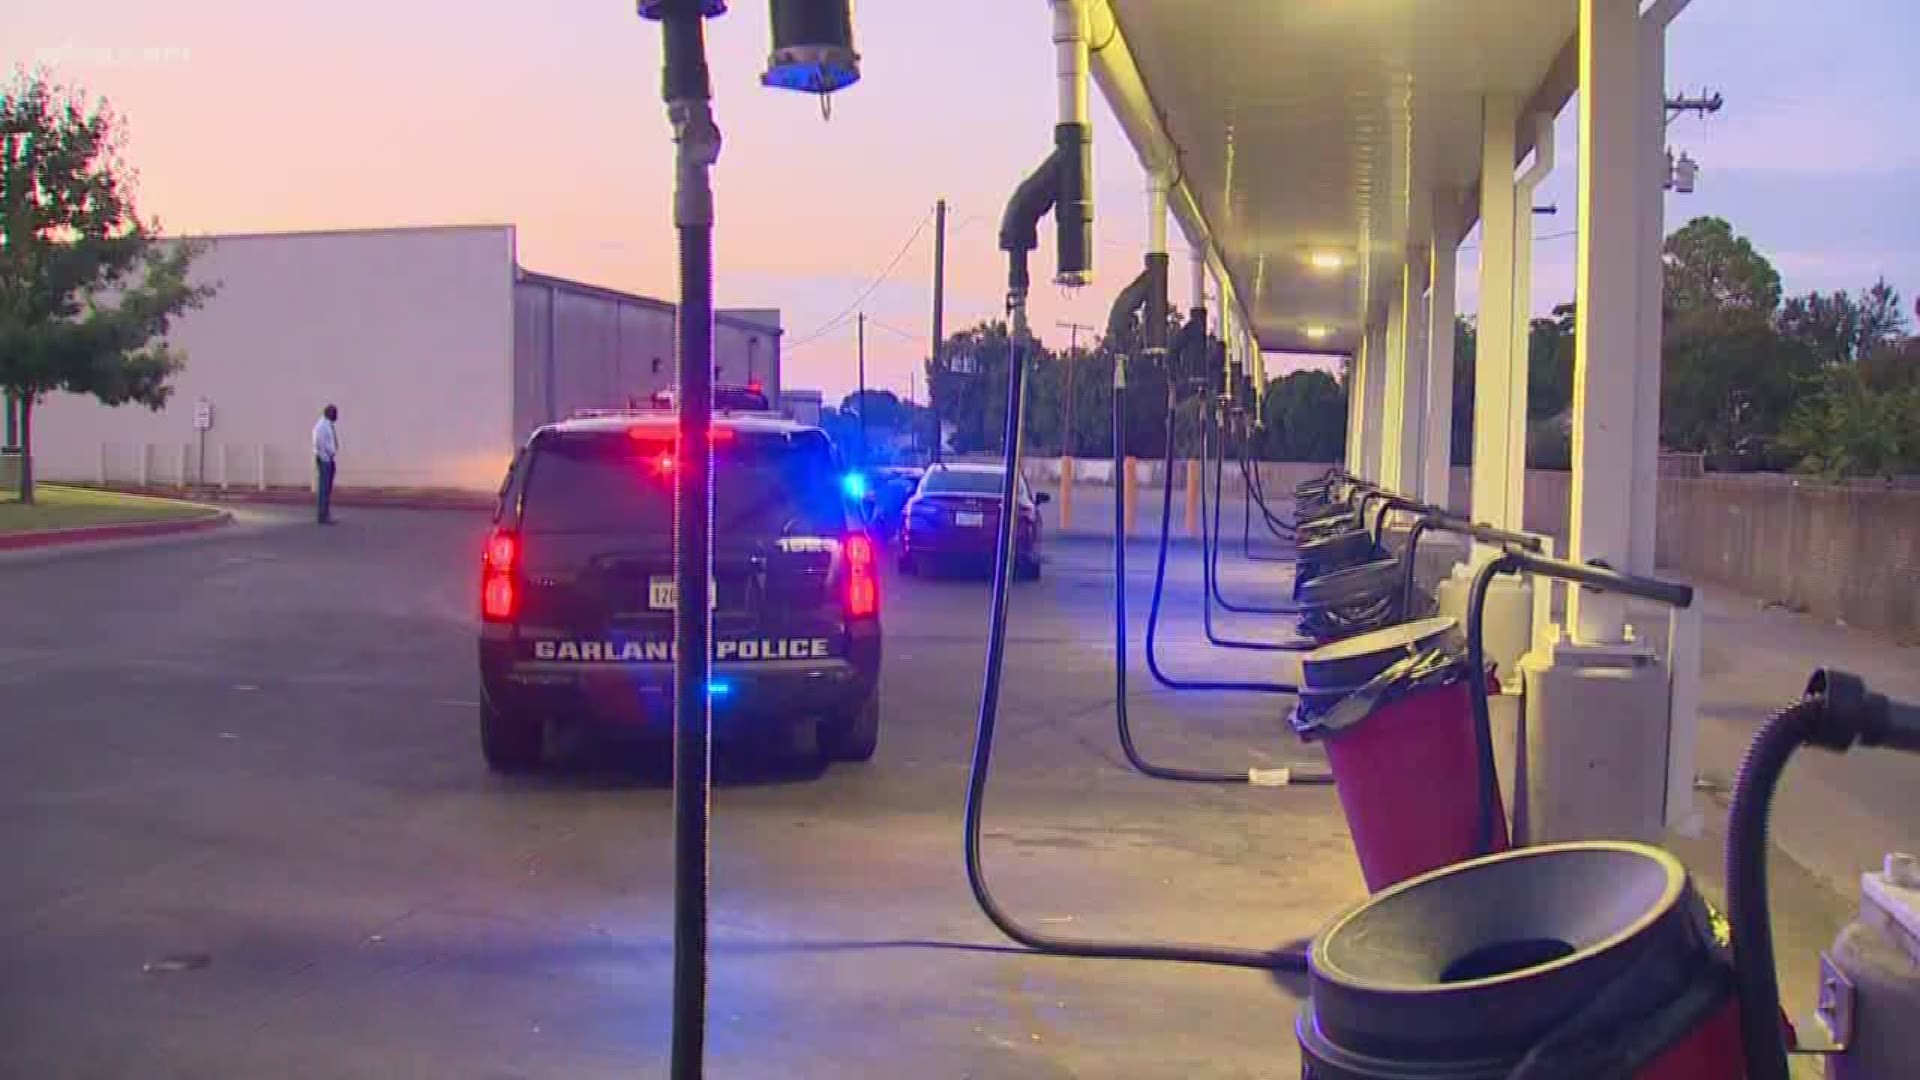 Garland police are investigating after a 10-month-old baby girl was found dead inside a vehicle Thursday evening.